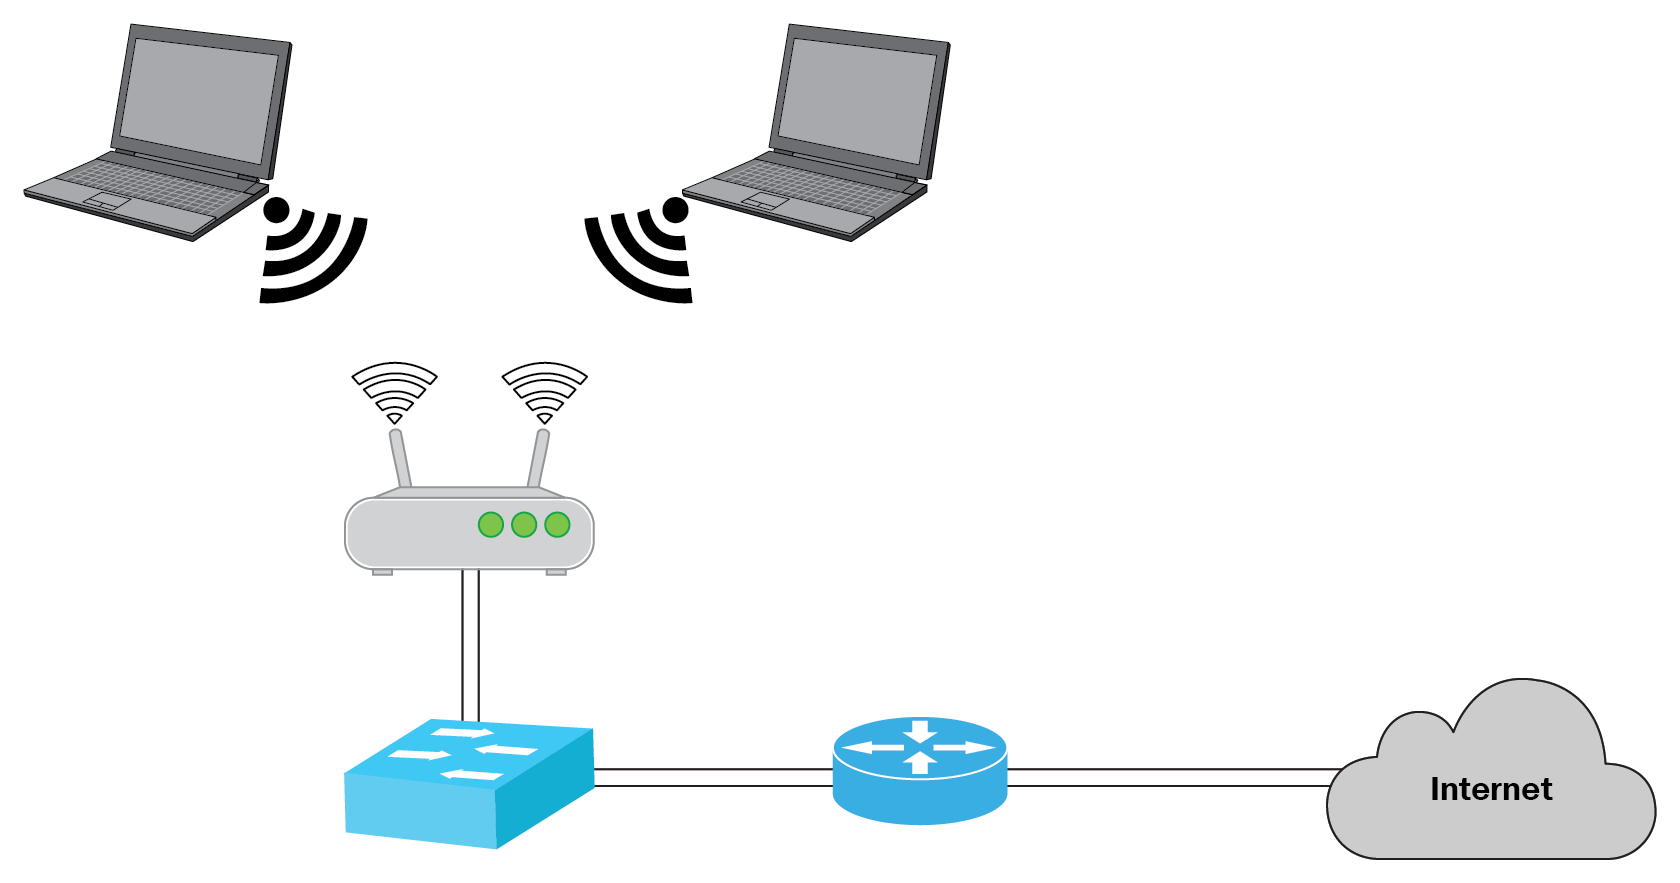 What is Wireless Network and What are its Types? - Study CCNA